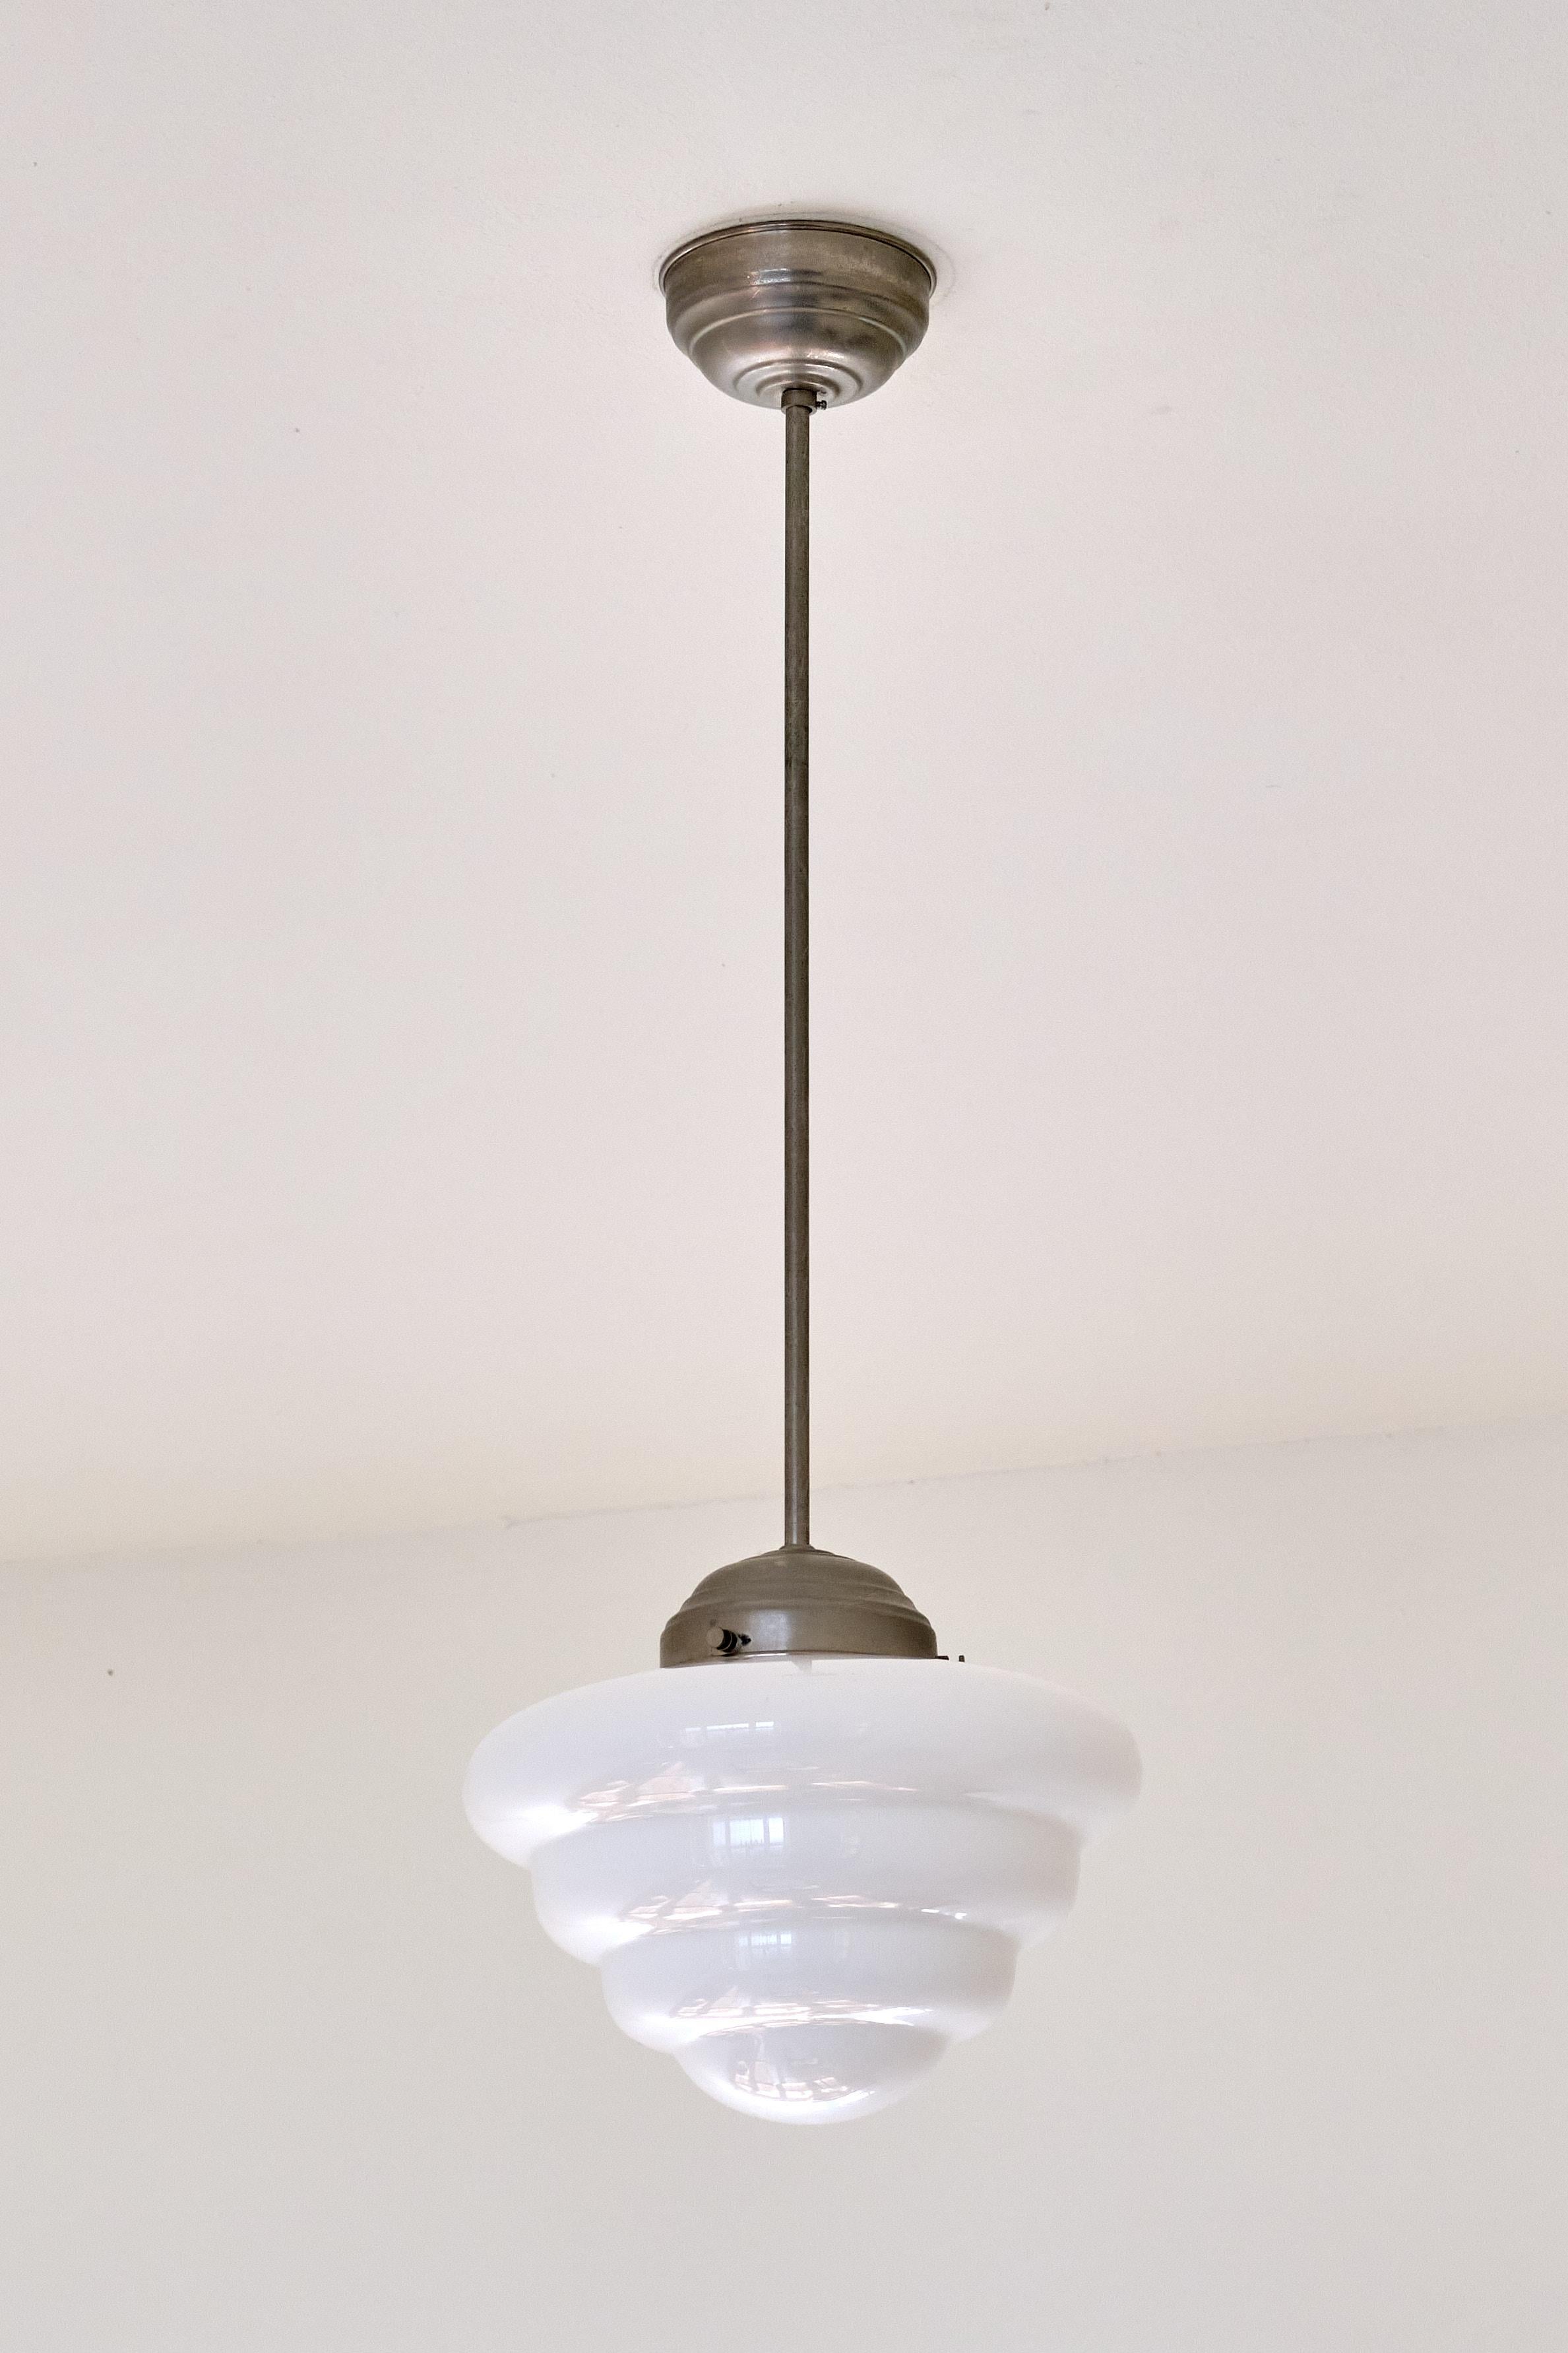 This rare pendant light was produced by Gispen in The Netherlands in the 1930s. The striking shade is in a four tiered, cascading and entirely rounded shape. The shade is made of a slightly glossy, white opaline glass. The model of the shade was